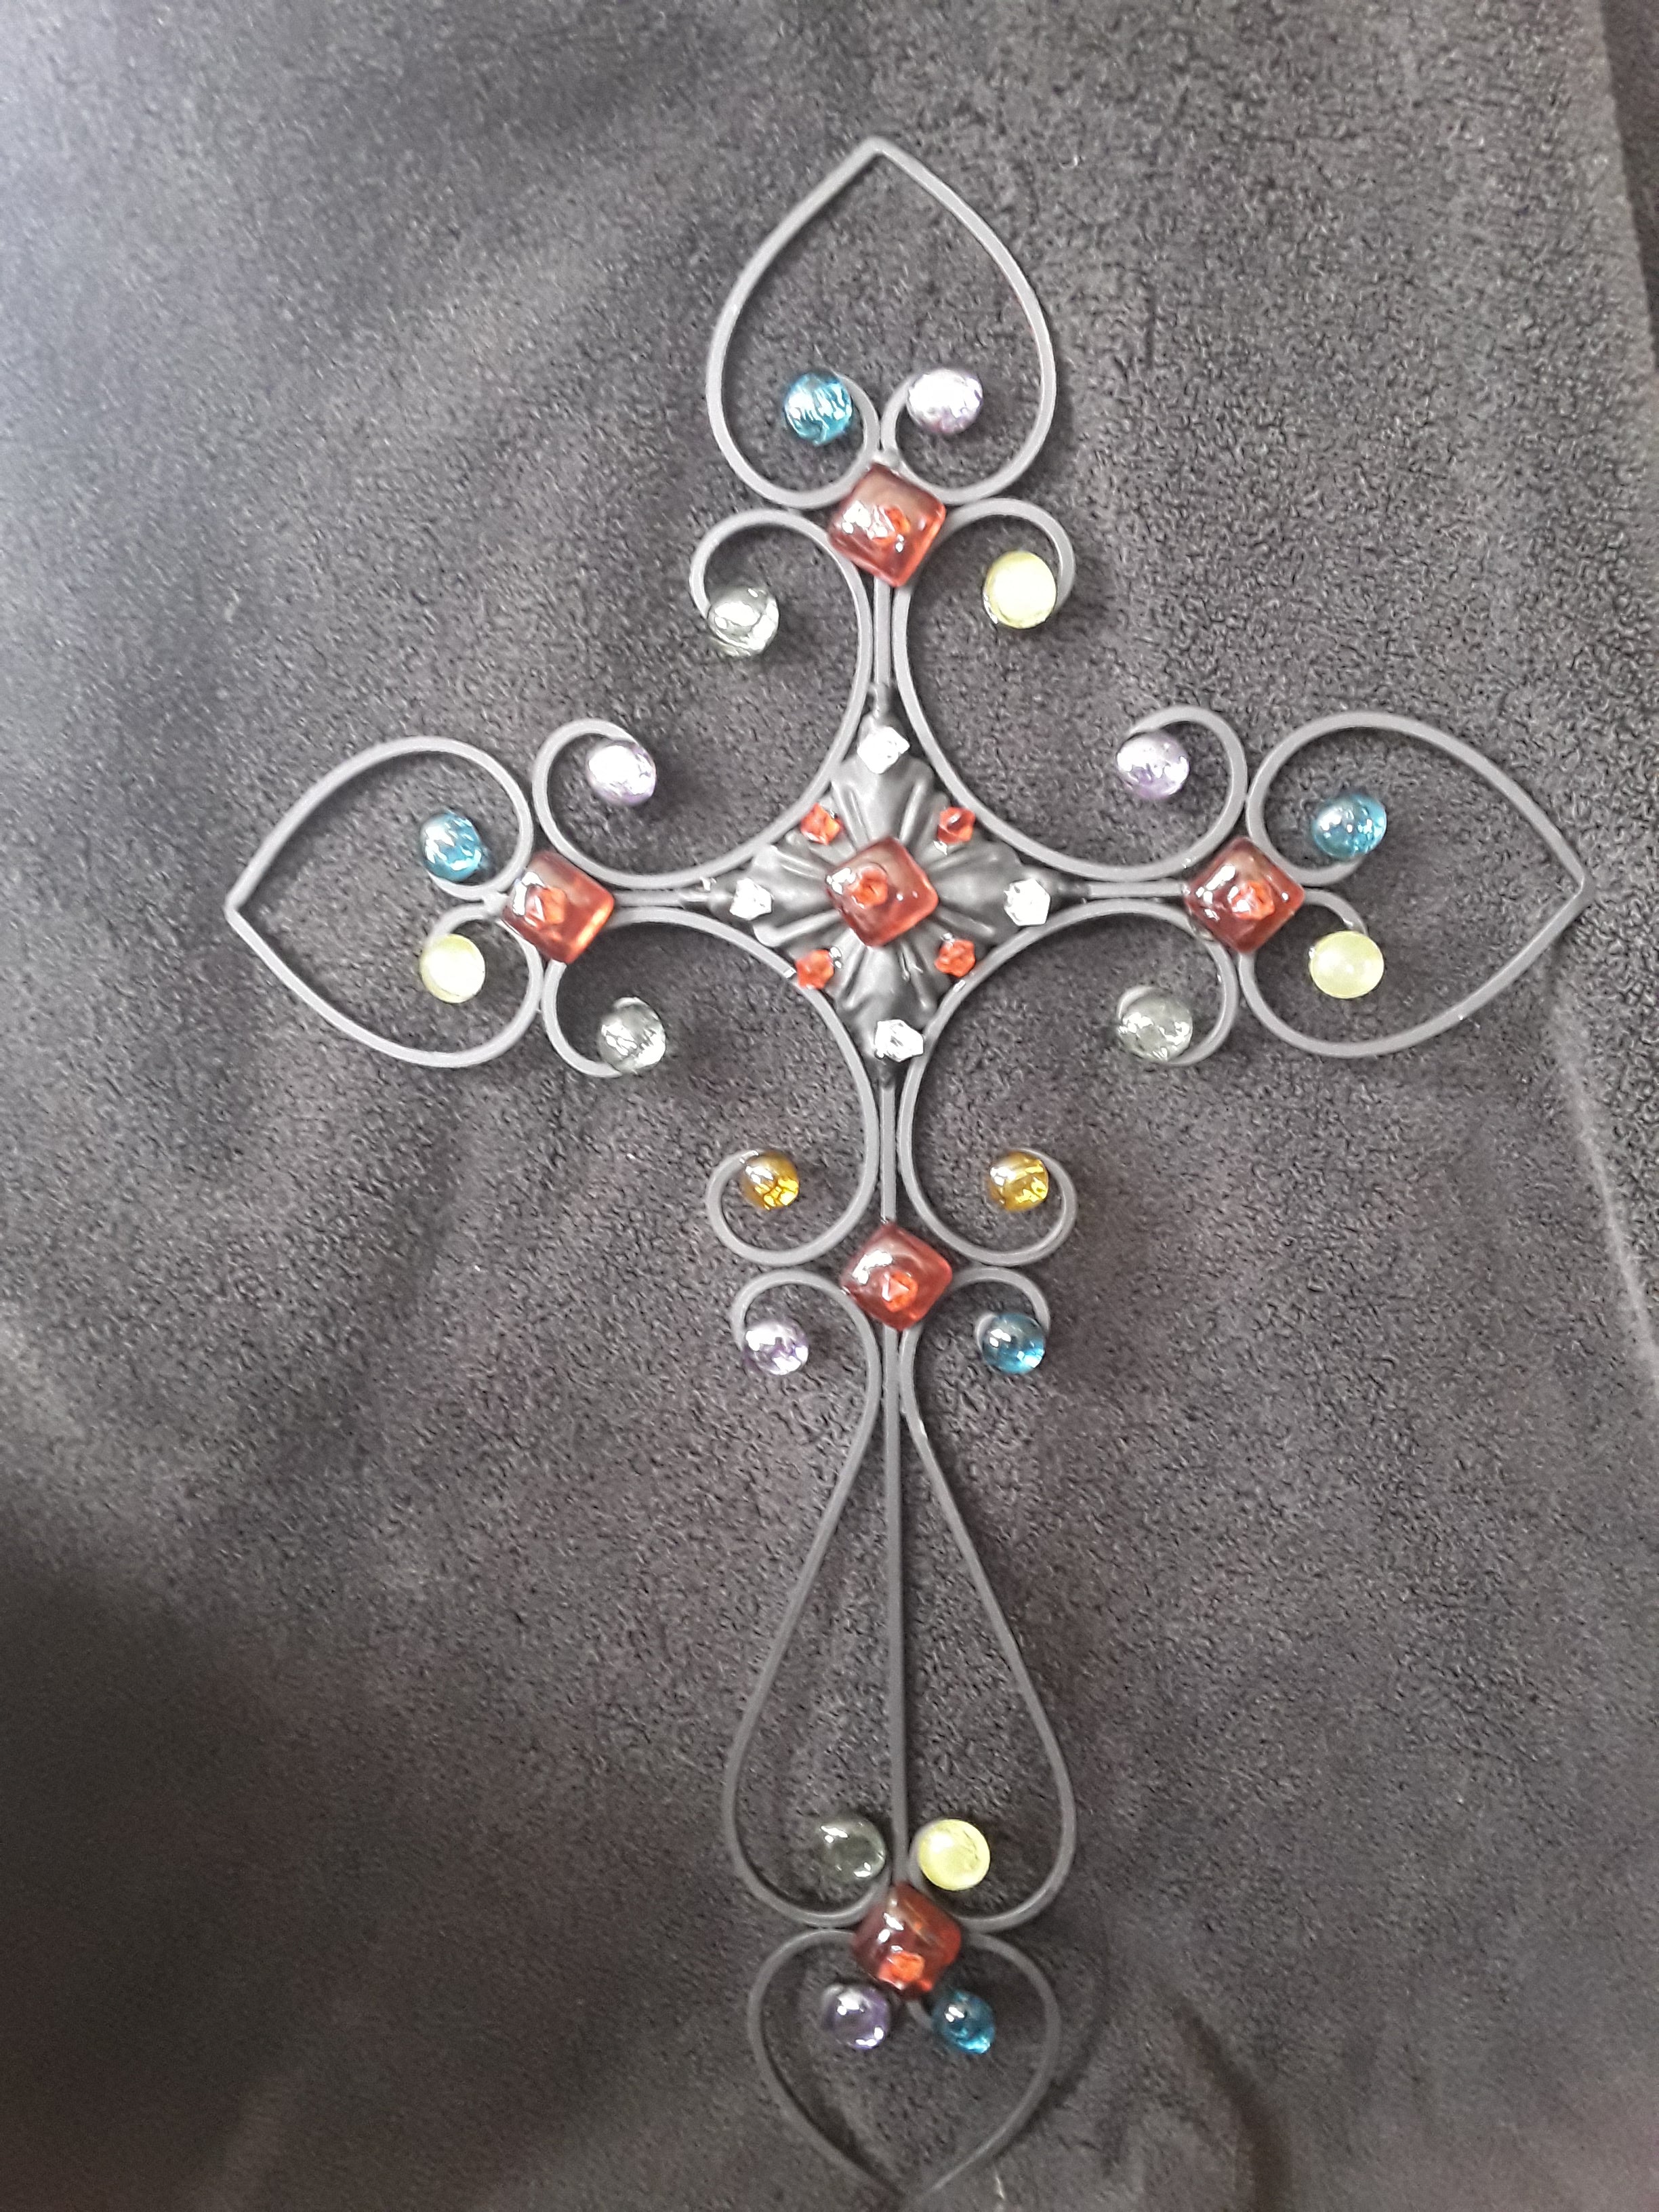 Beautiful Metal Filigree Cross Embellished with Multi-colored Flat Back Stones and Plastic Crystal Dazzlers